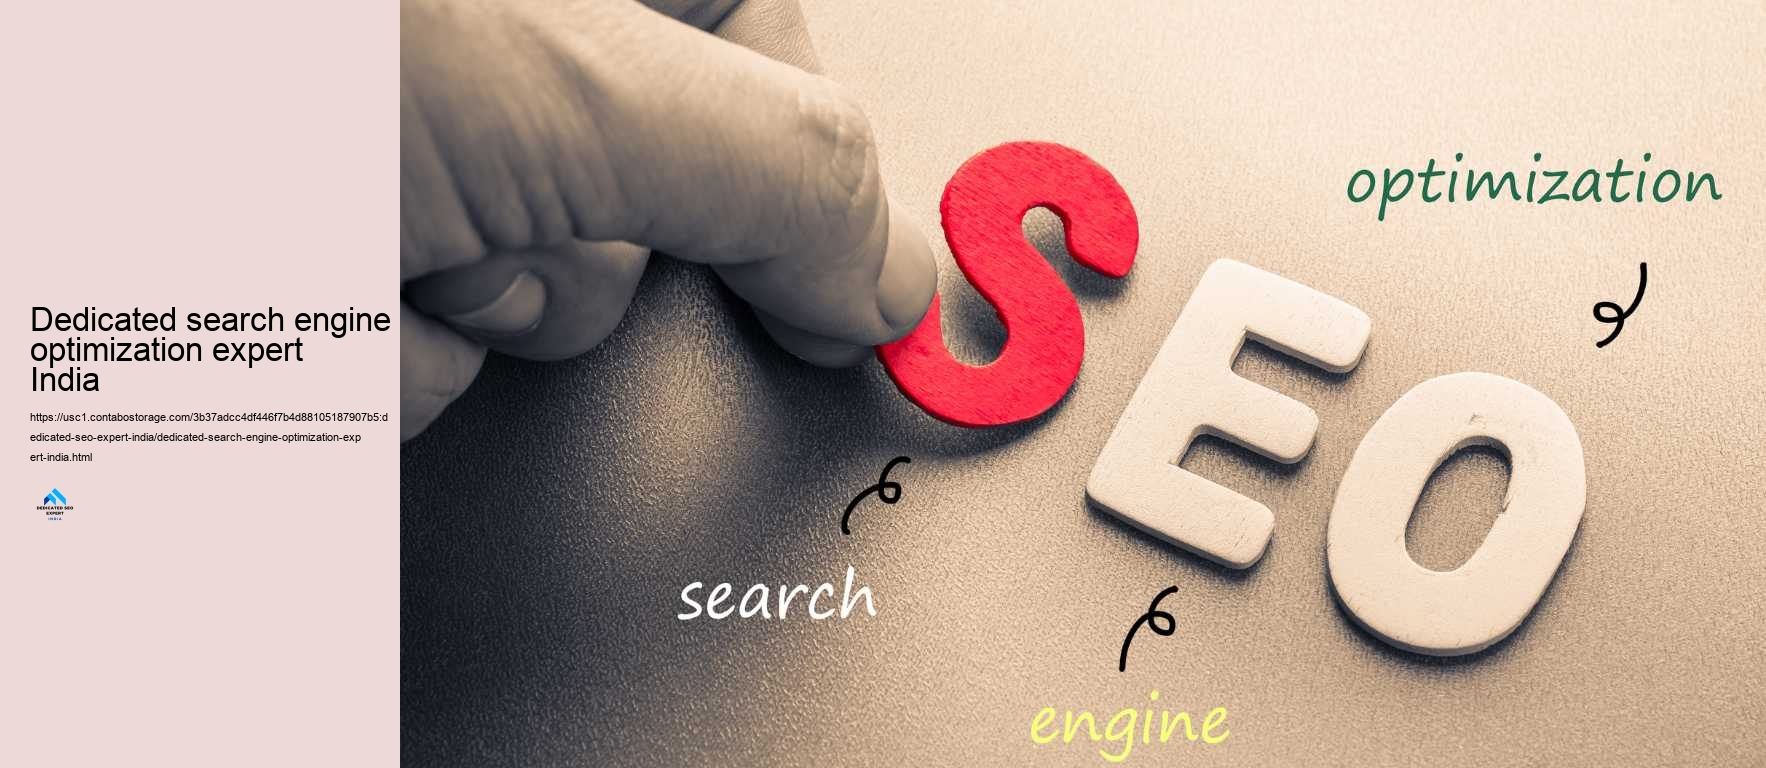 Dedicated search engine optimization expert India